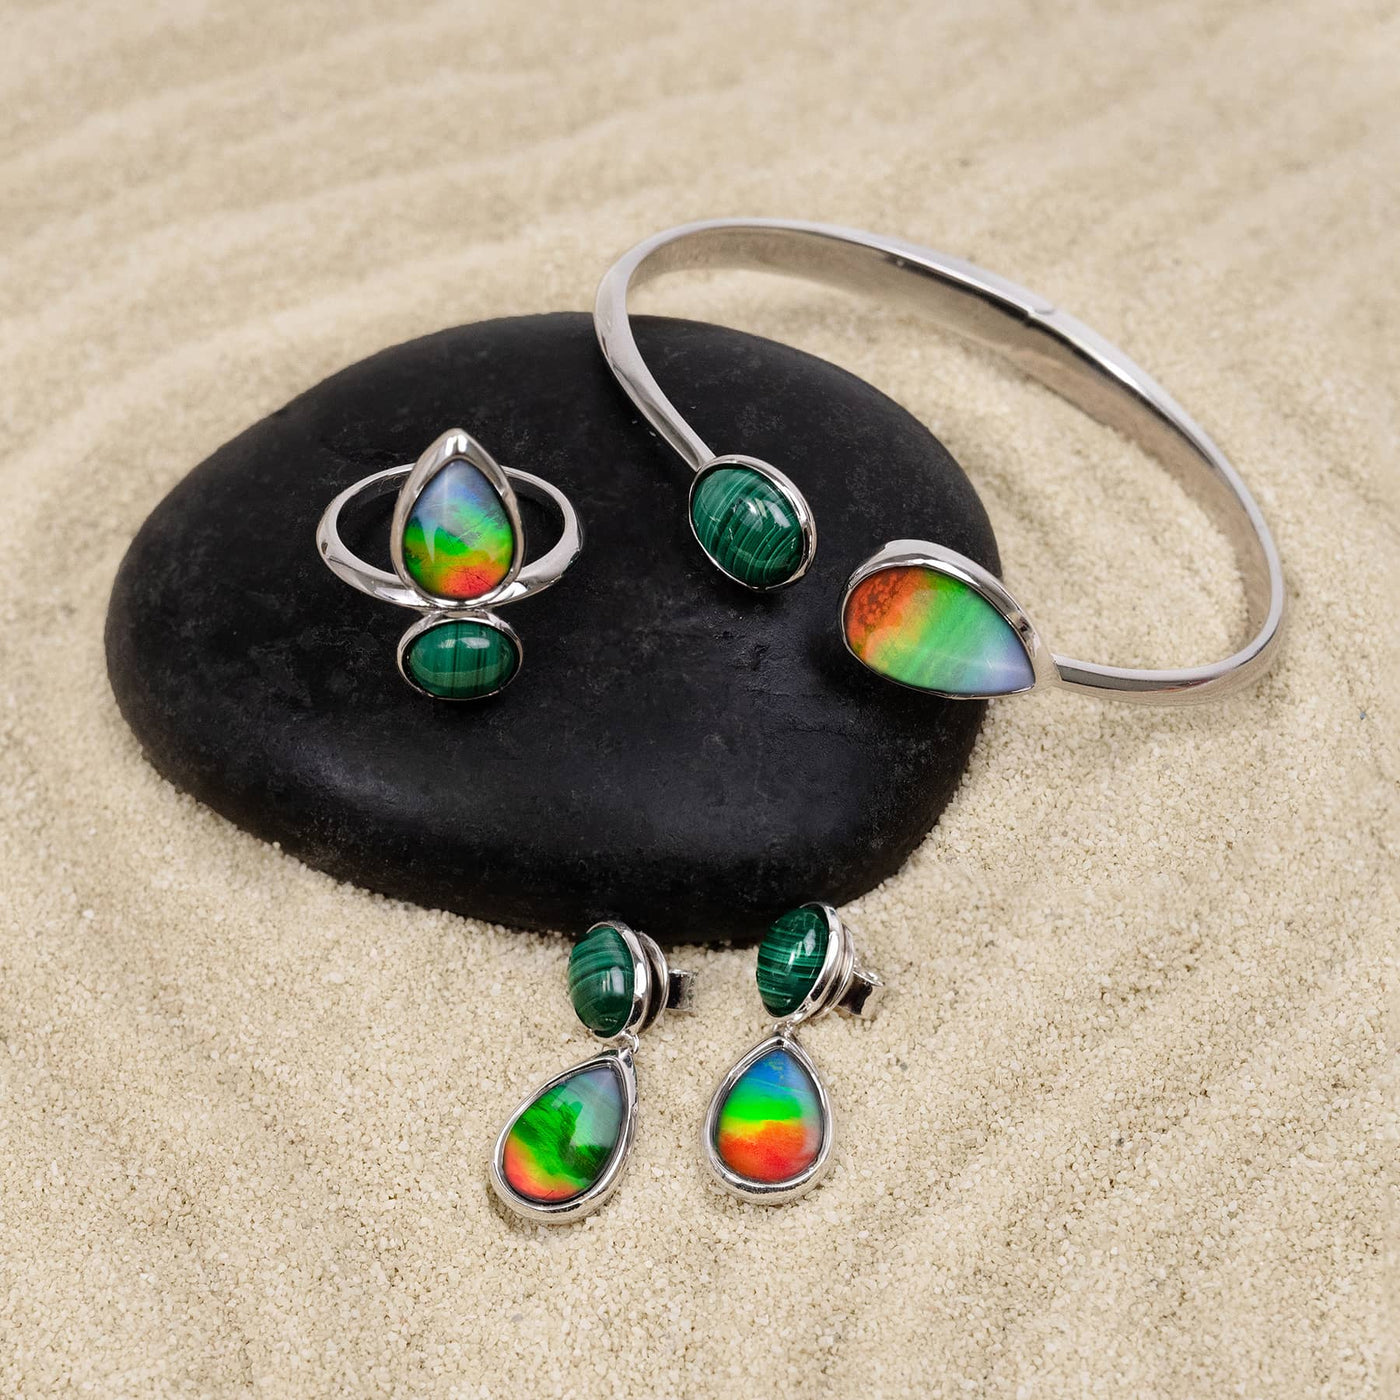 Harmony ammolite ring in sterling silver with malachite